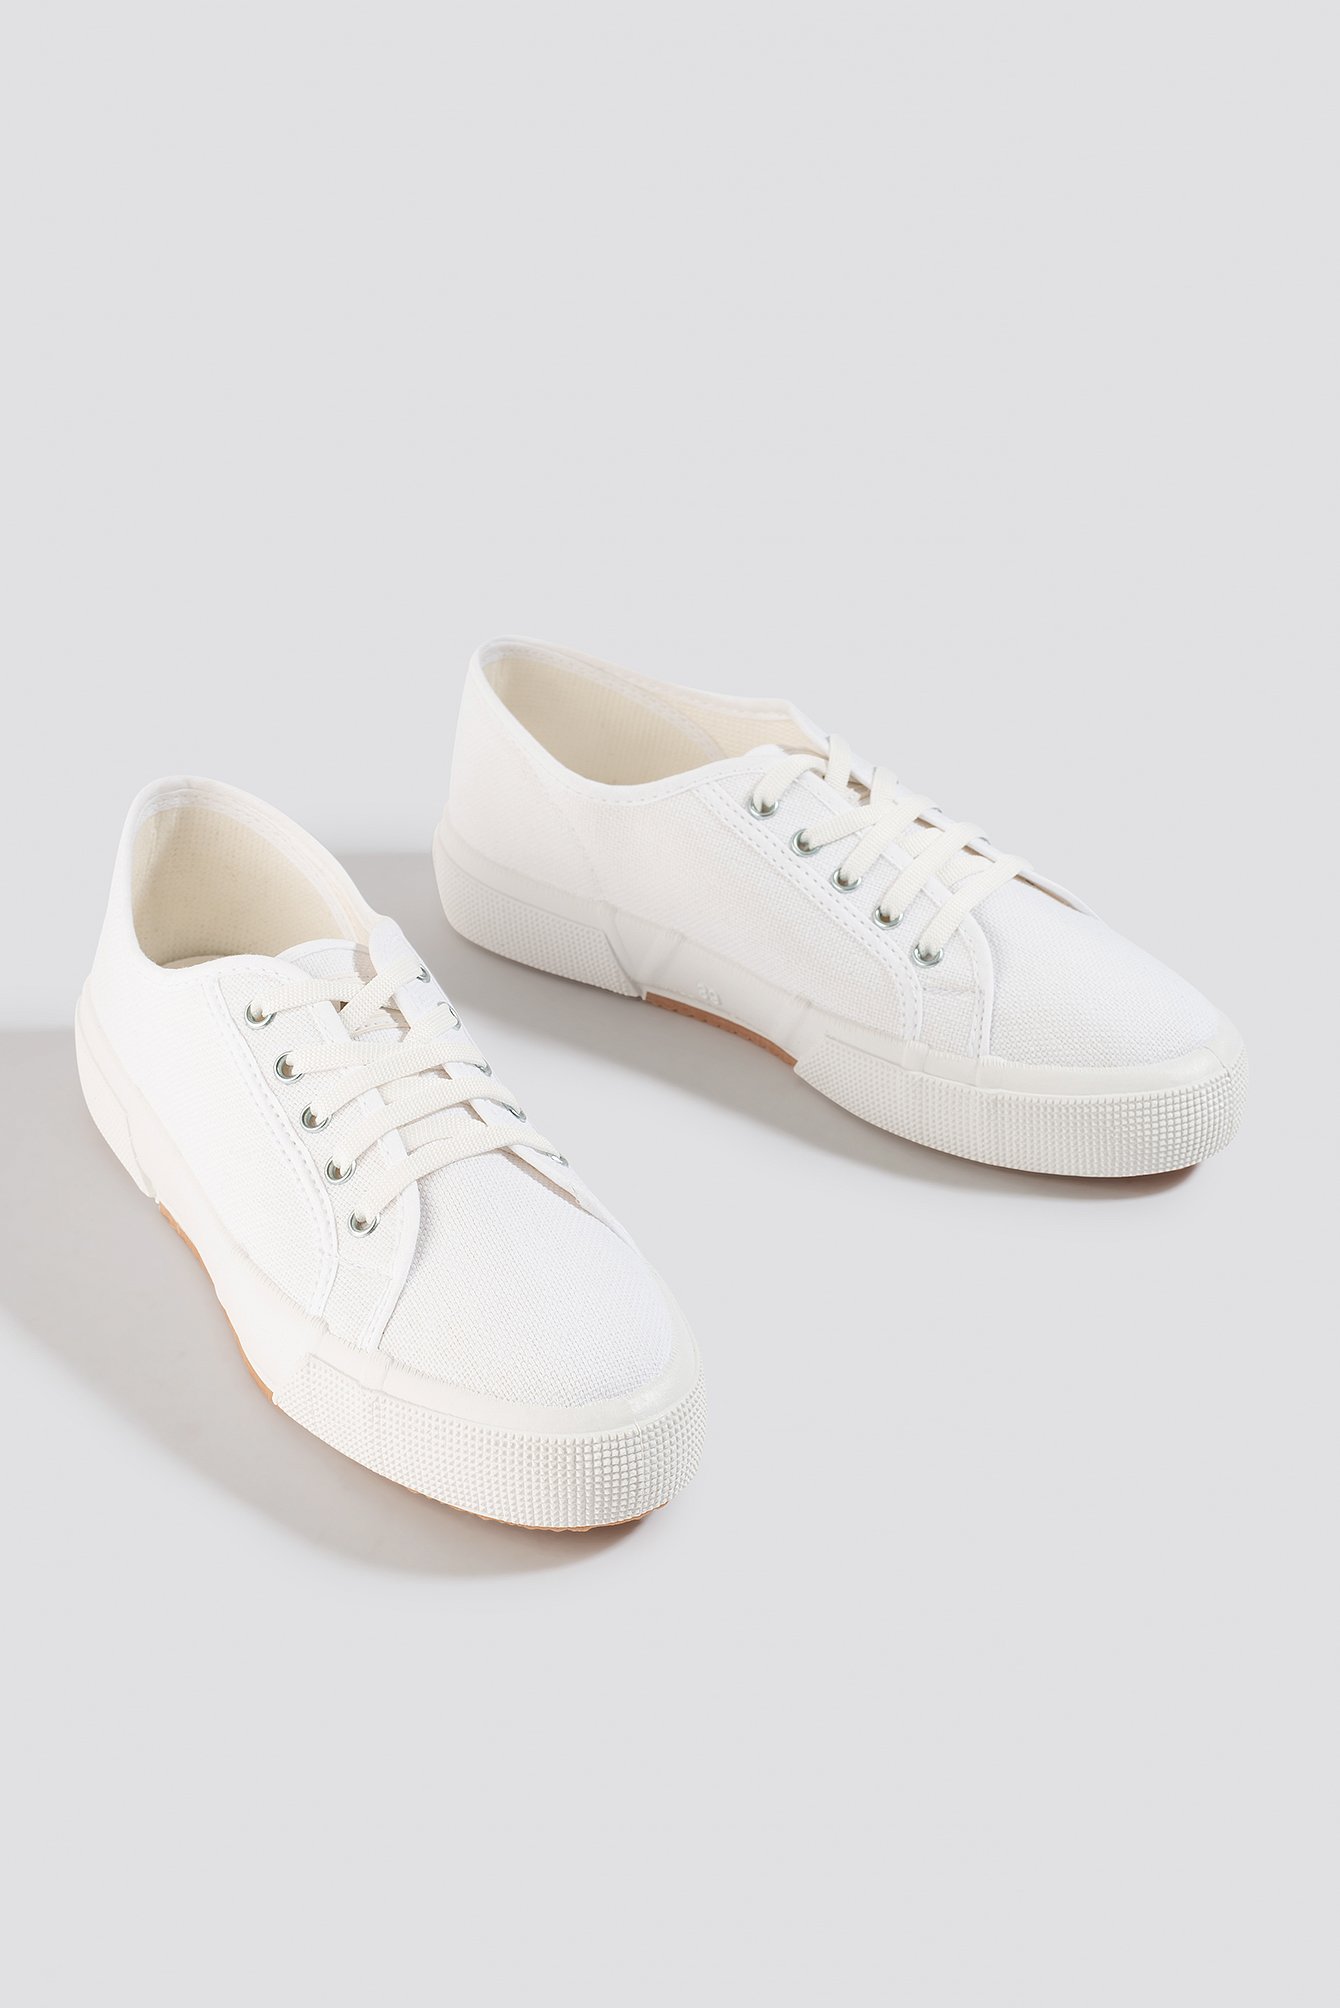 NA-KD Shoes Basic Canvas Sneakers - White